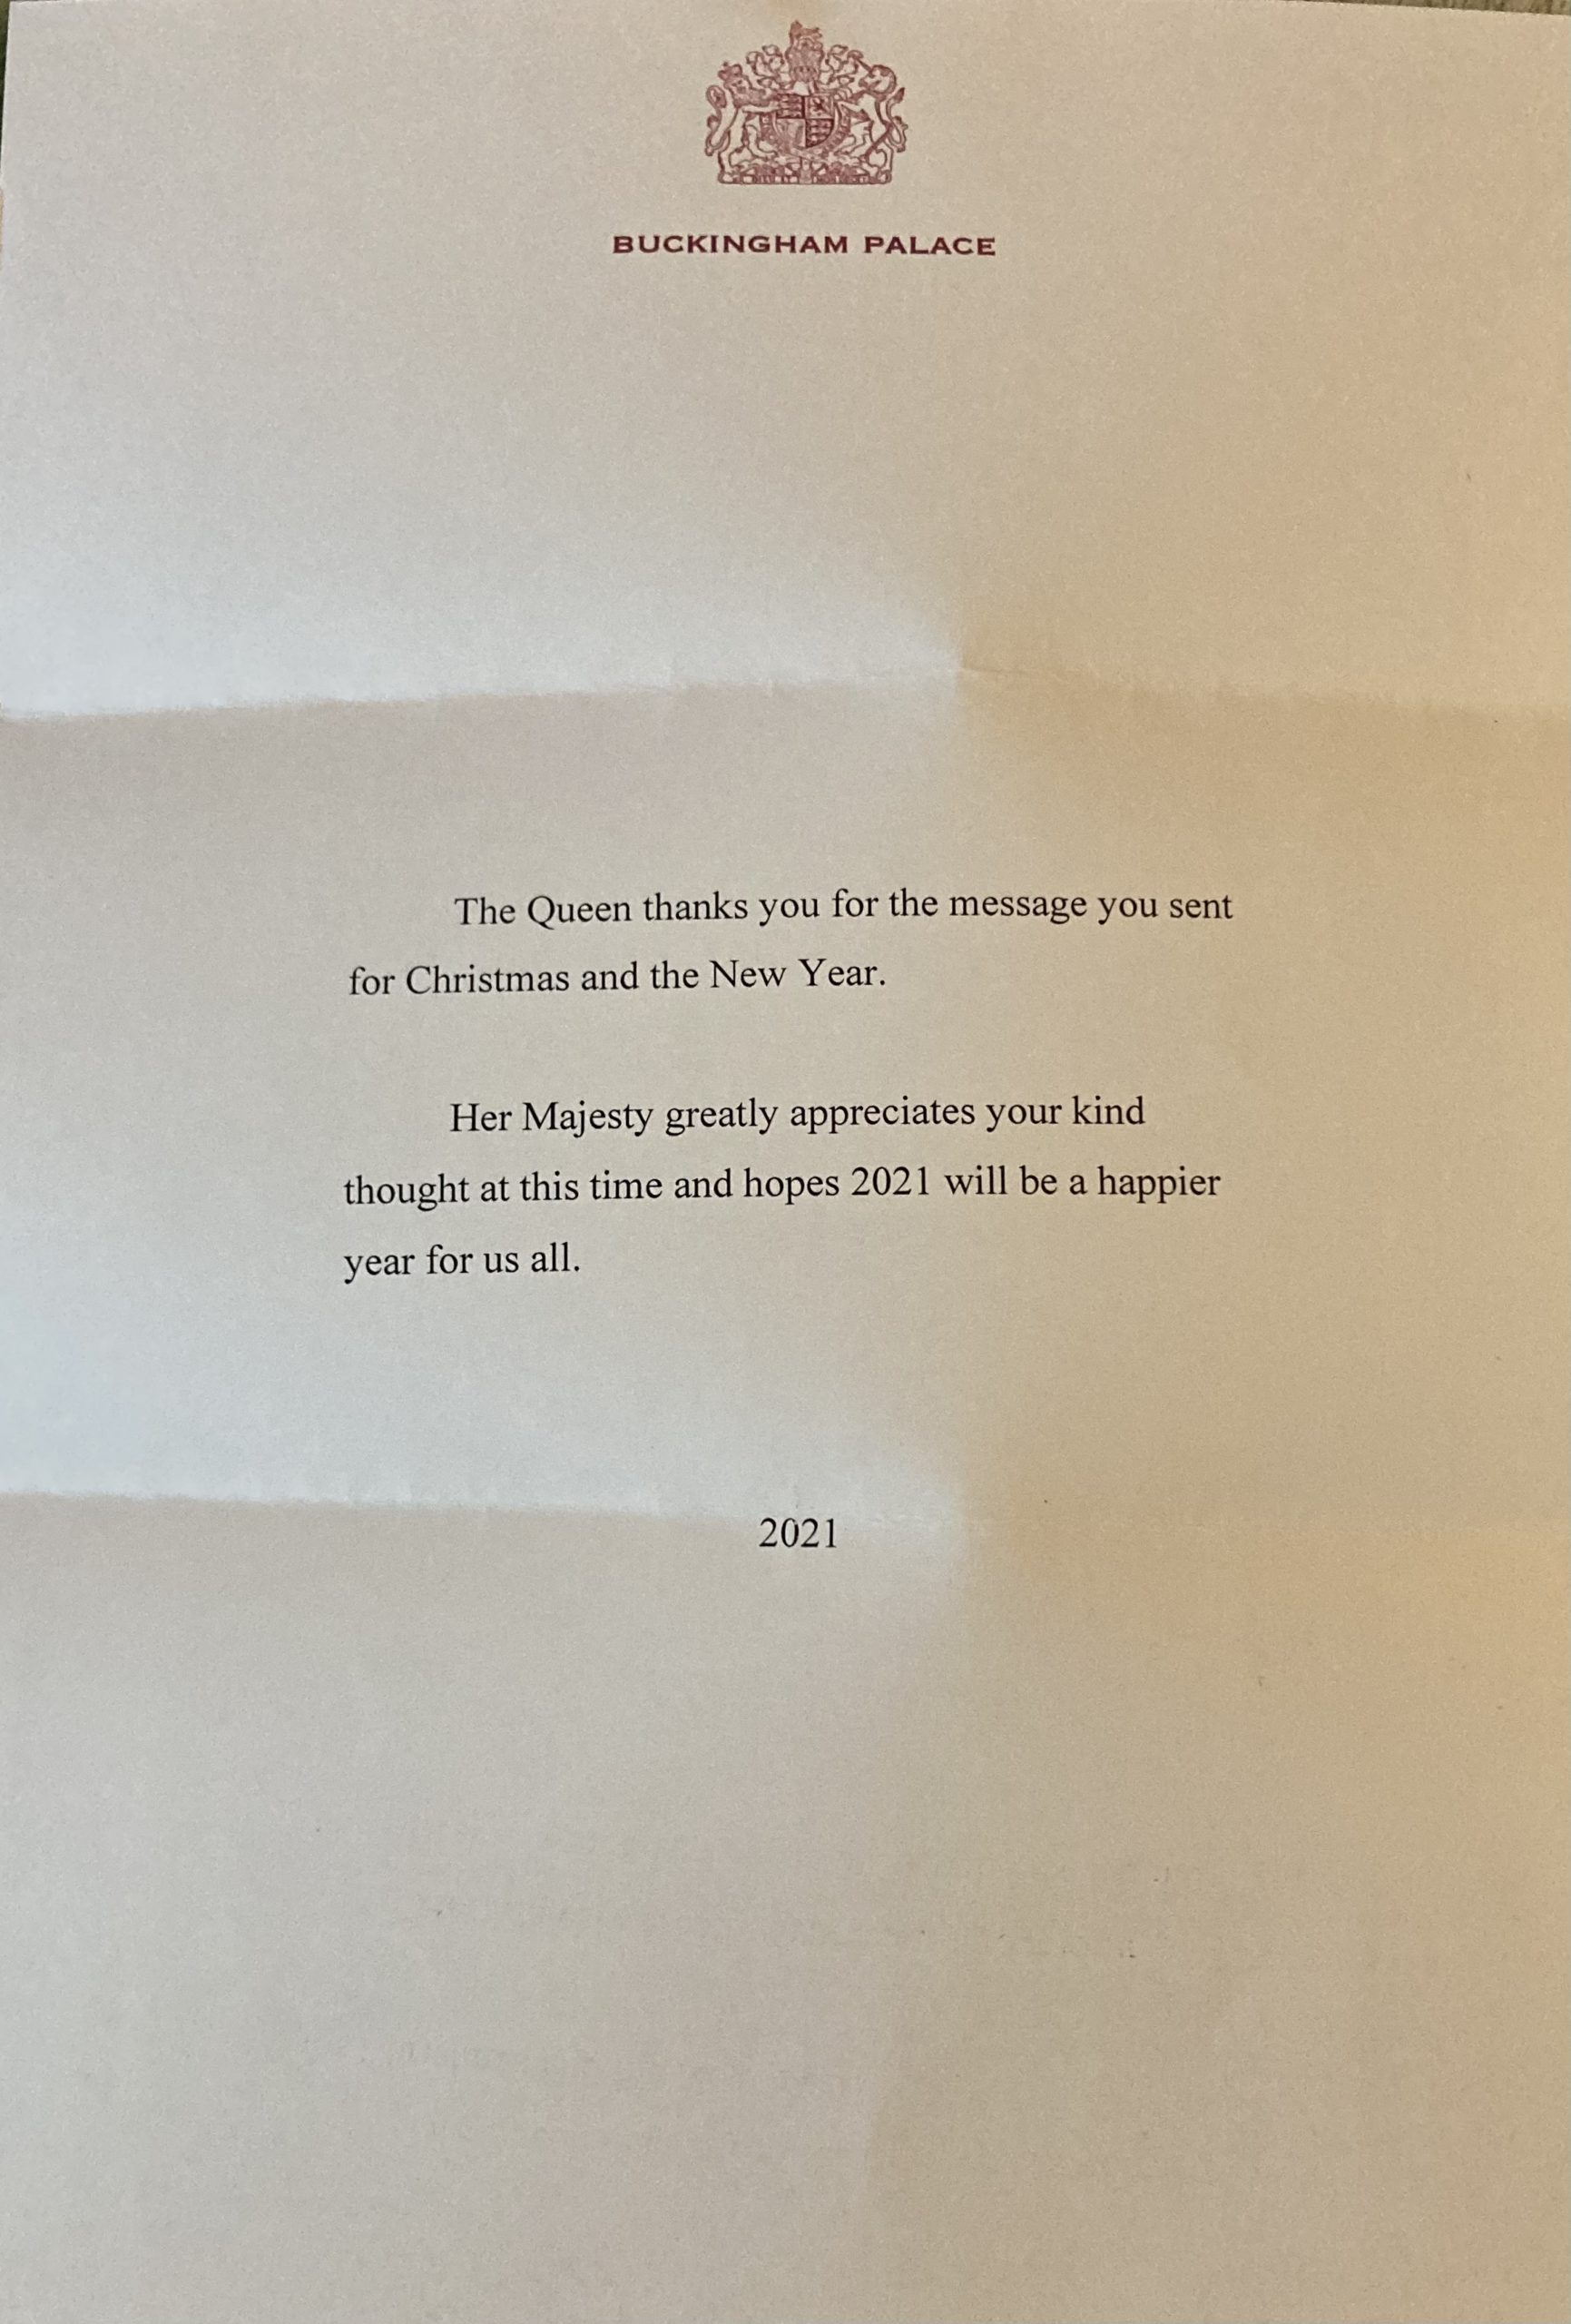 Her Majesty's Christmas 2020 Reply